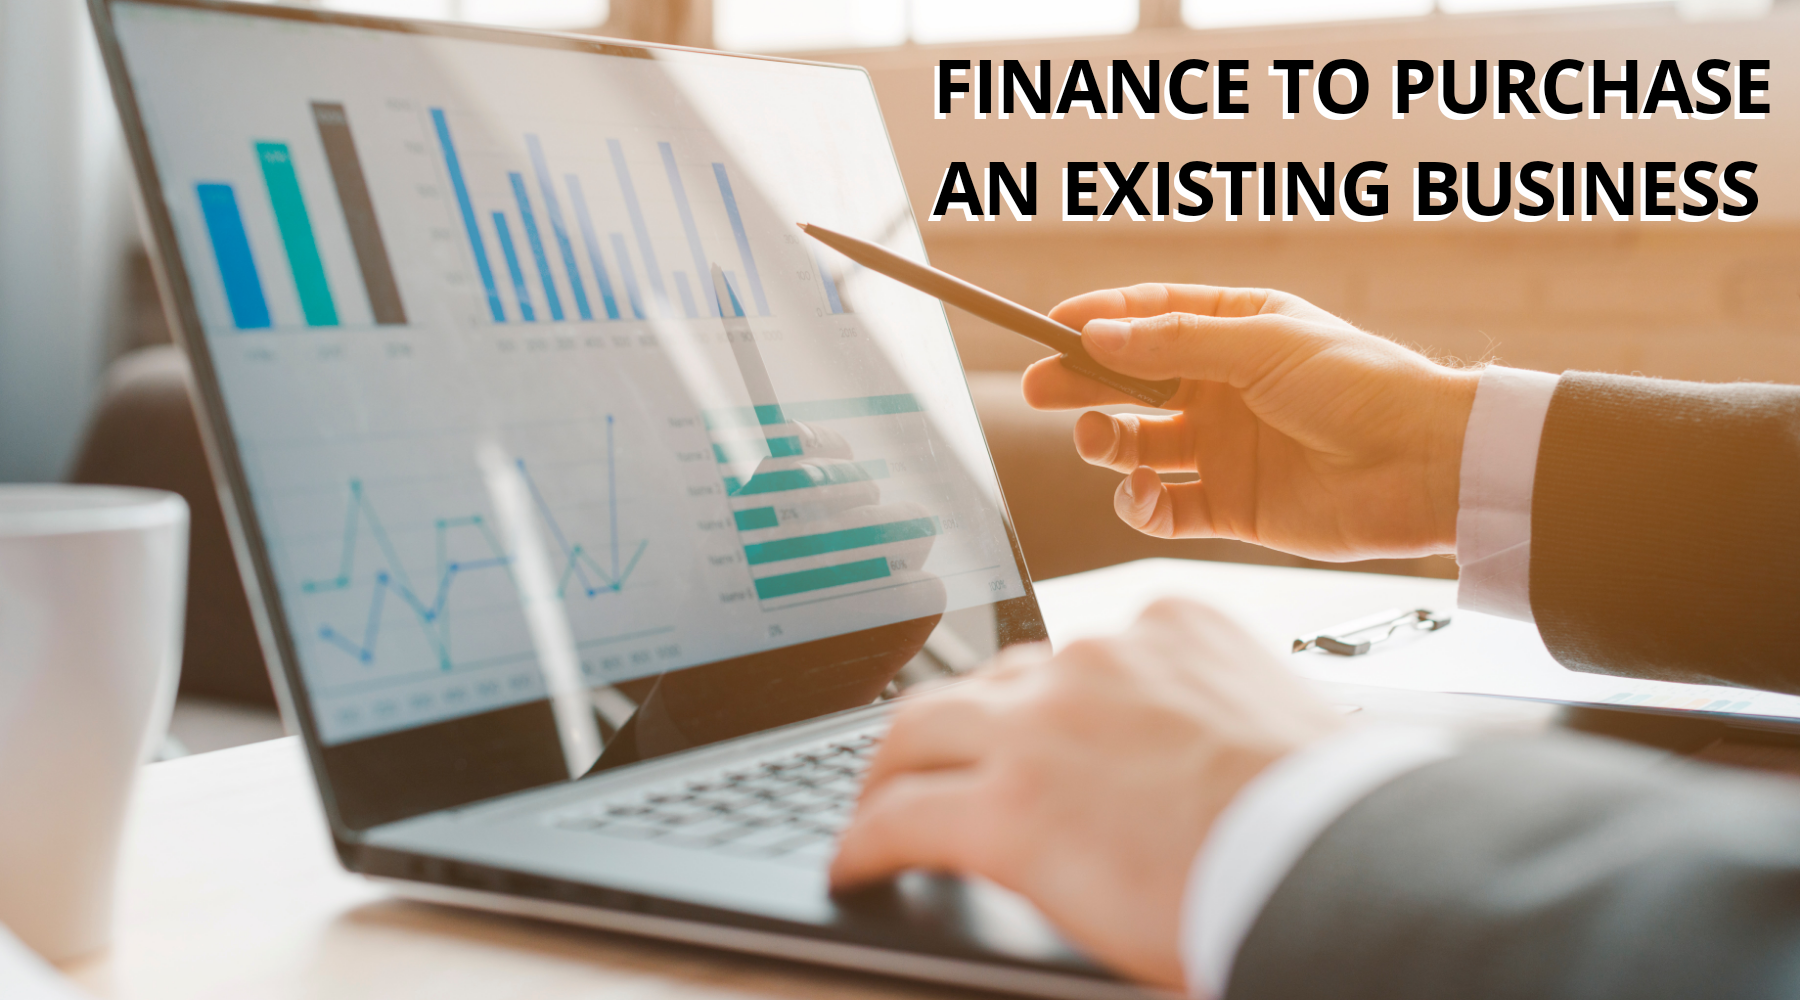 A Complete Guide on How to Get Finance to Purchase an Existing Business